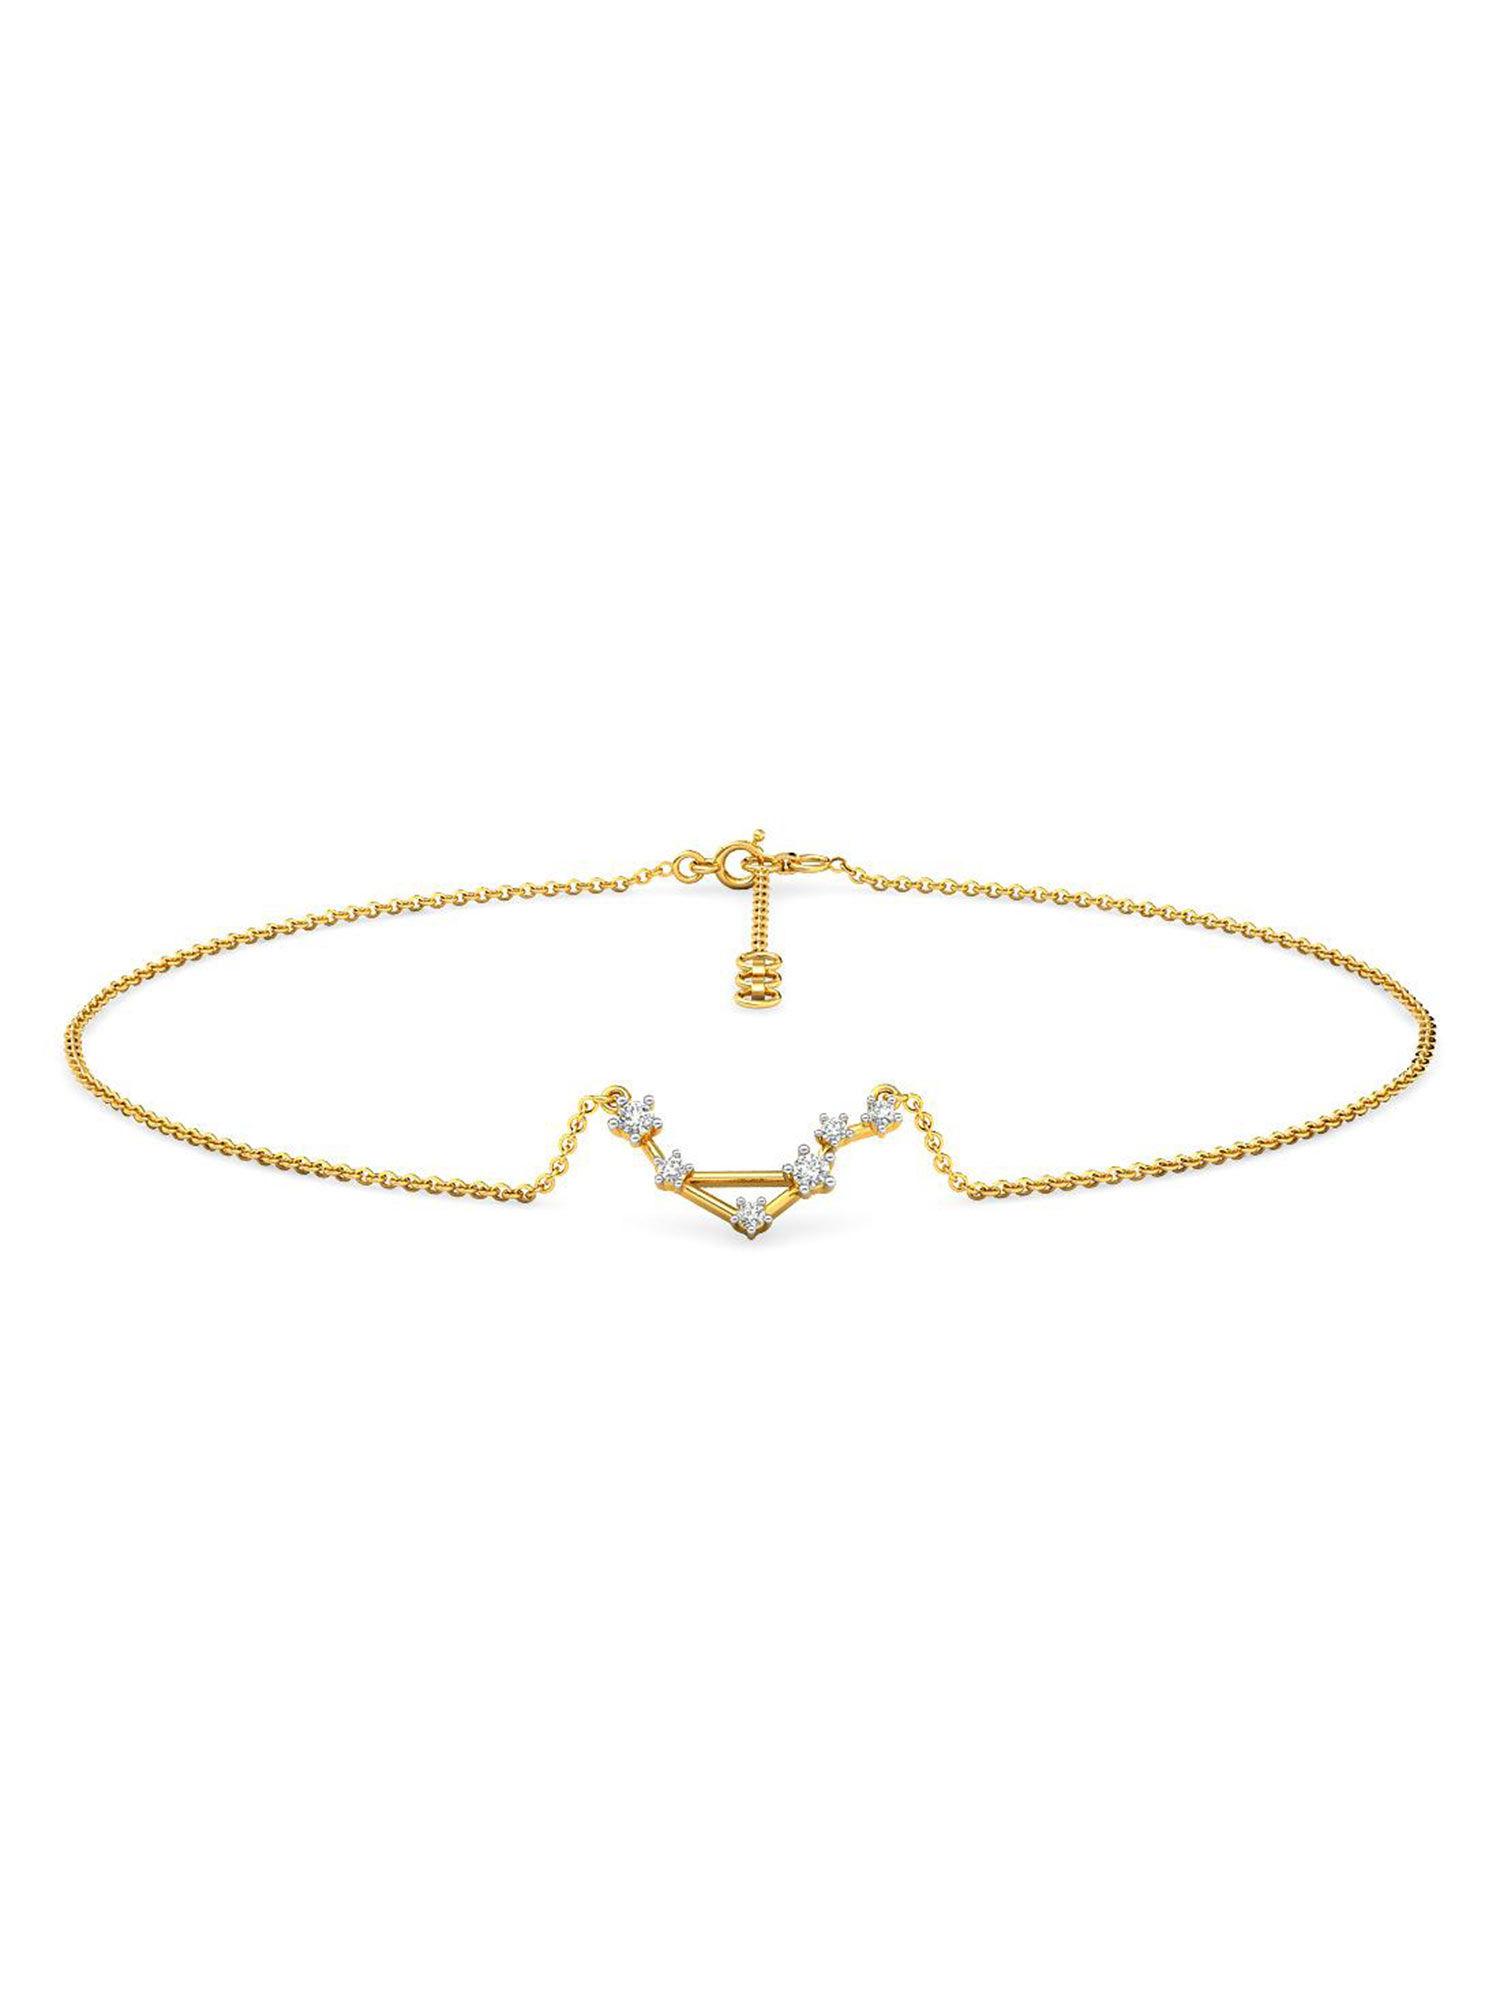 libra 18k yellow gold and diamond anklet for women